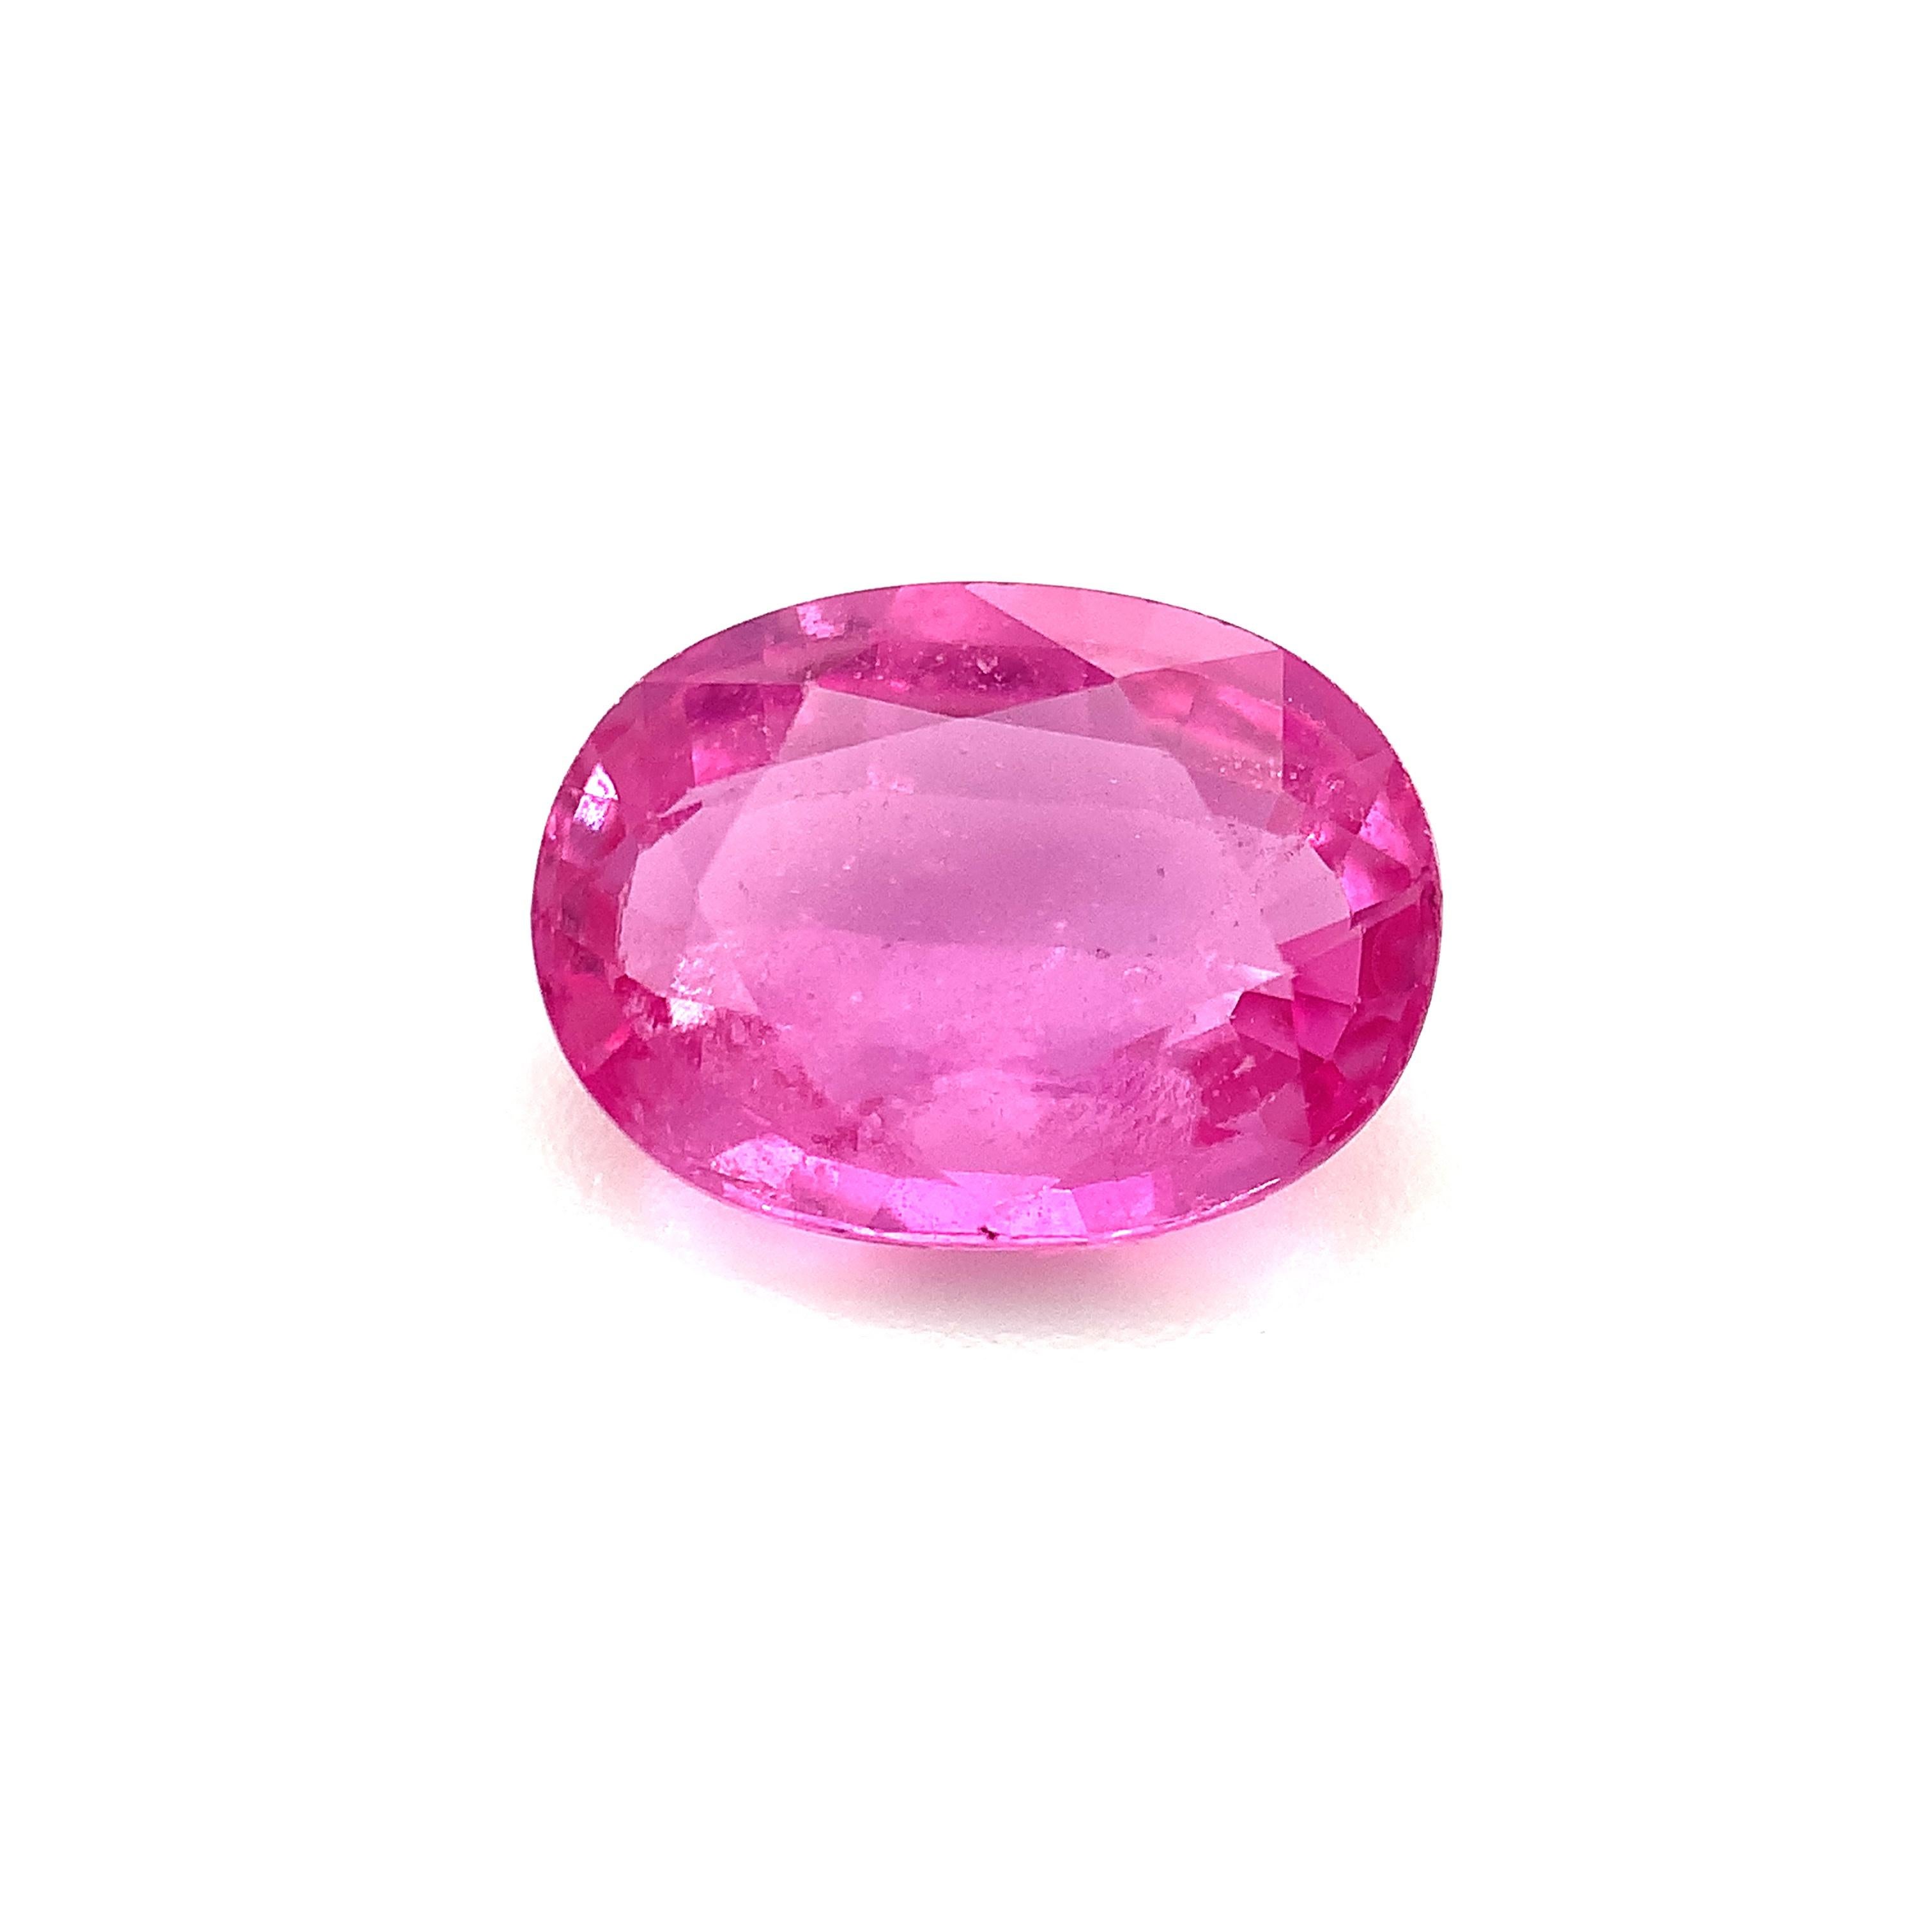 Oval Cut 2.11 Carat Pink Sapphire Oval, Unset Loose Gemstone, GIA Certified   For Sale